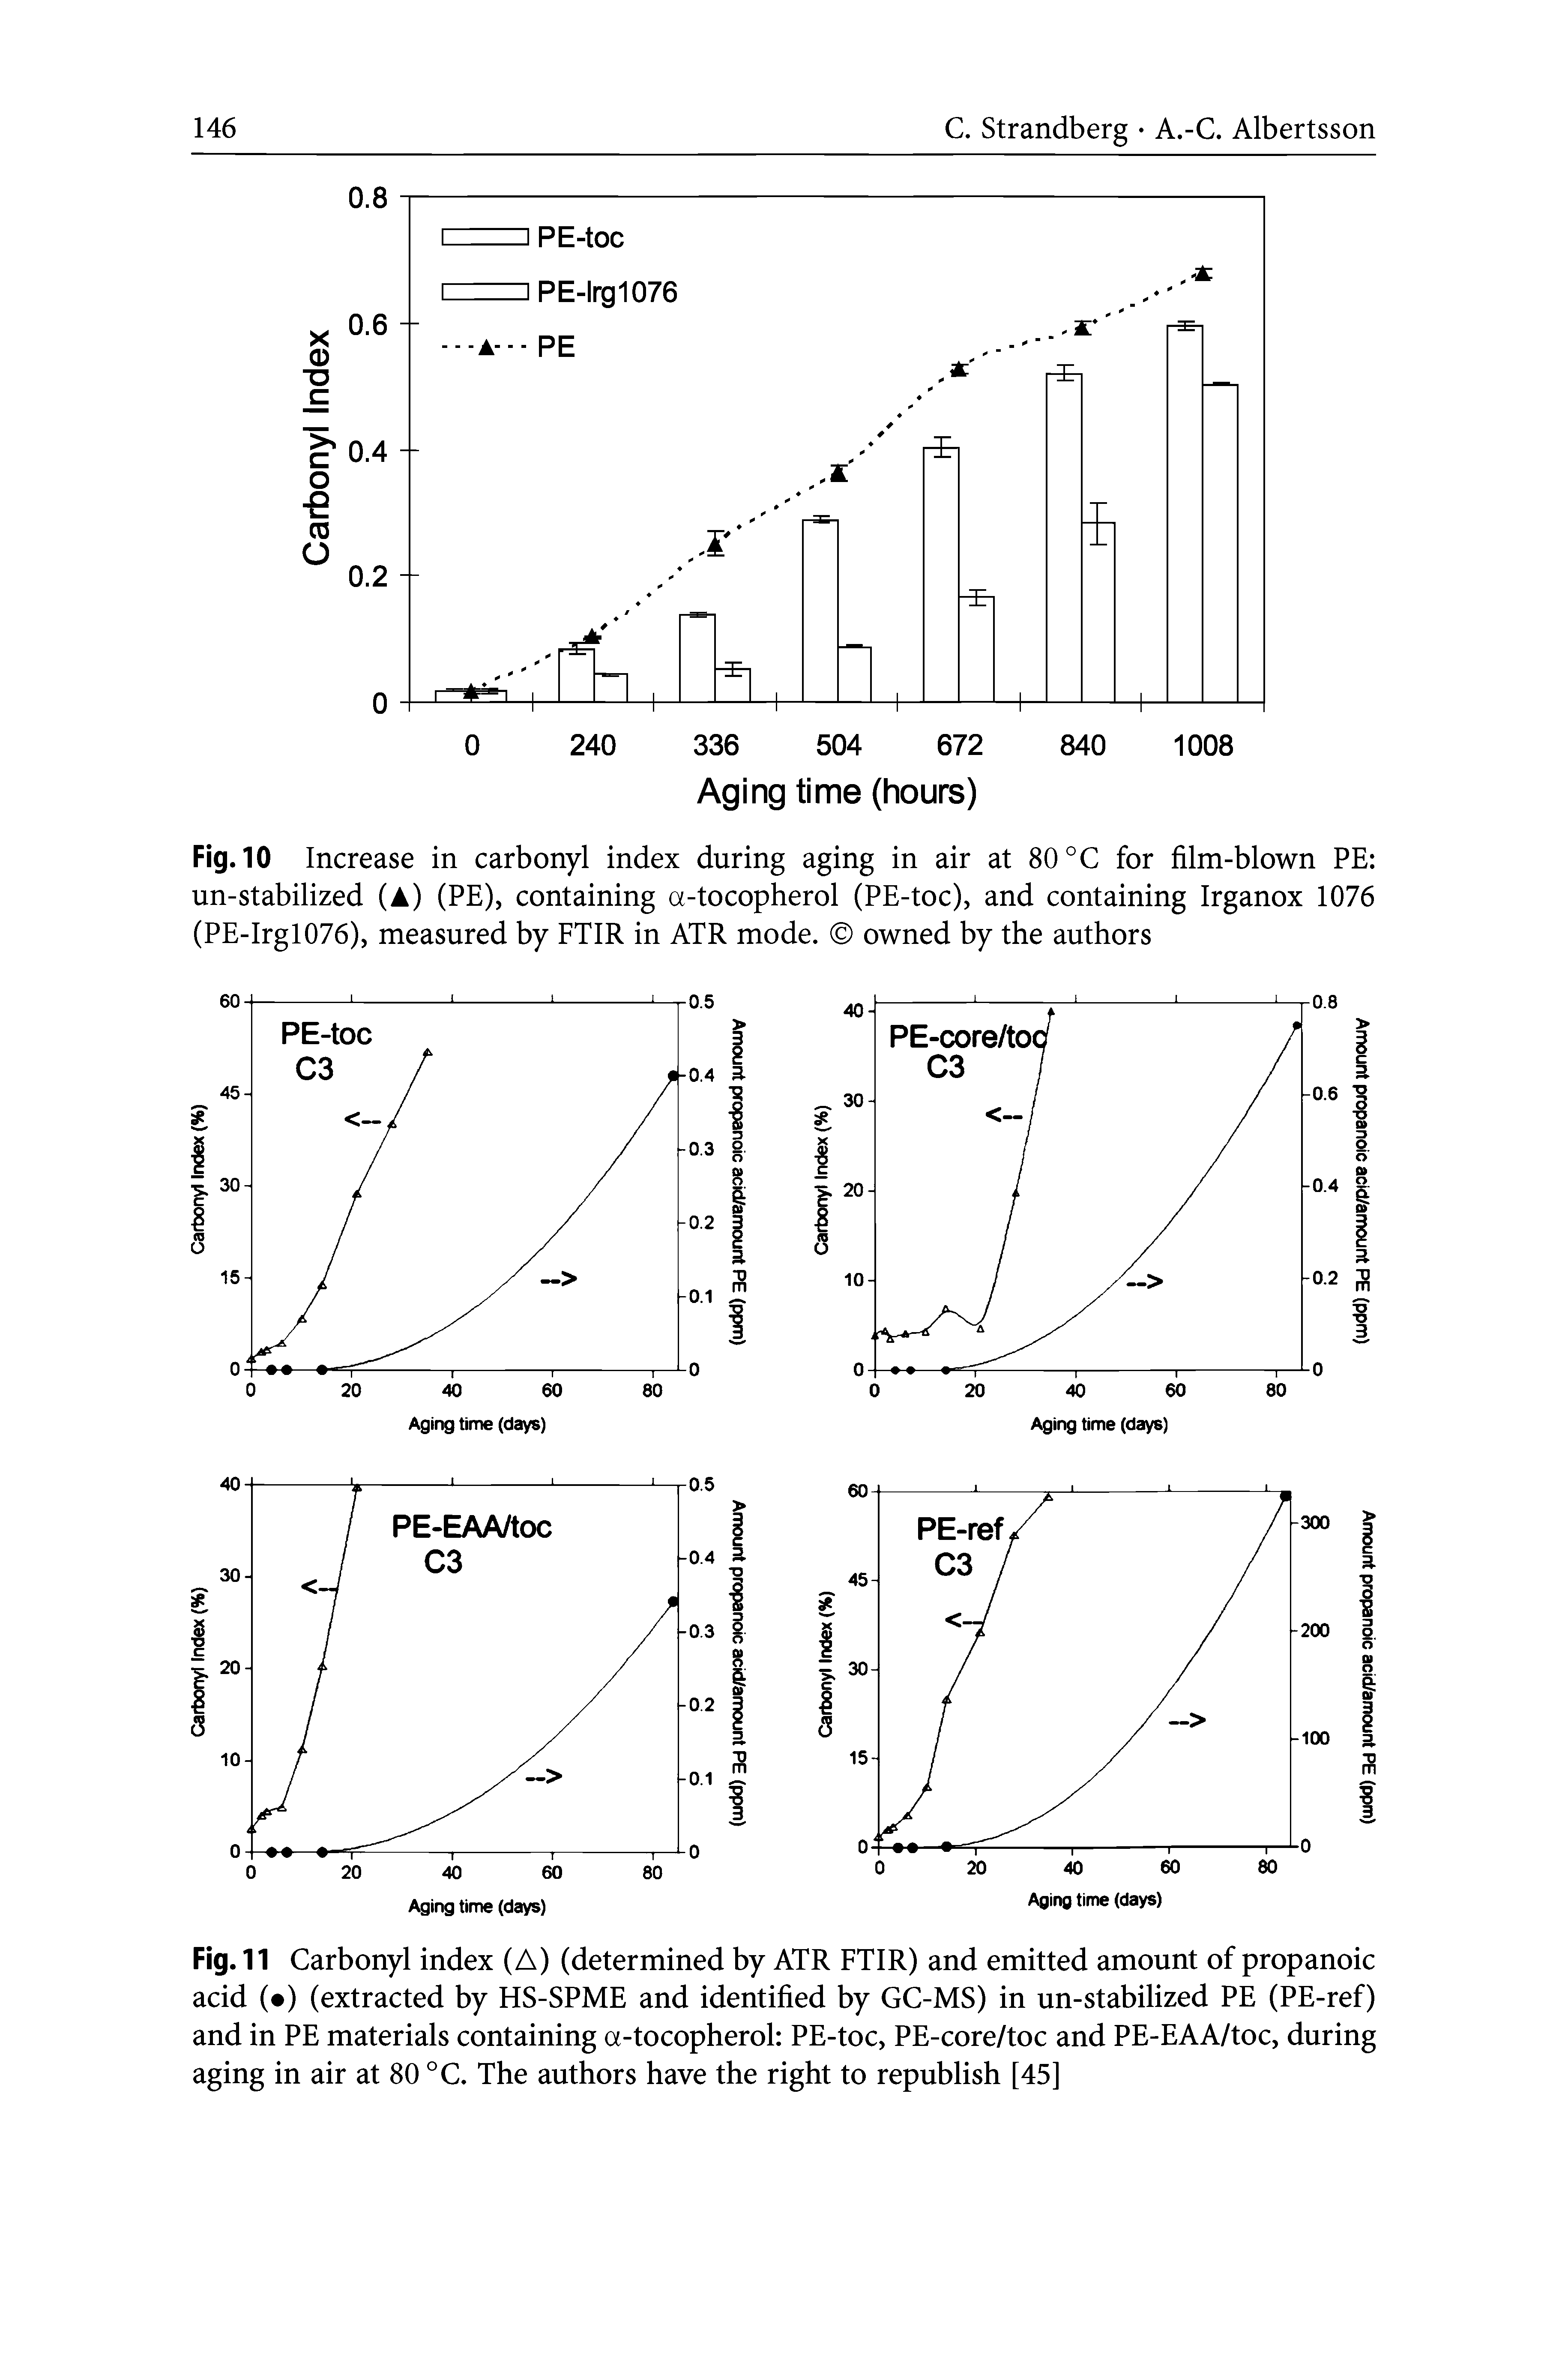 Fig. 11 Carbonyl index (A) (determined by ATR FTIR) and emitted amount of propanoic acid ( ) (extracted by HS-SPME and identified by GC-MS) in un-stabilized PE (PE-ref) and in PE materials containing a-tocopherol PE-toc, PE-core/toc and PE-EAA/toc, during aging in air at 80 °C. The authors have the right to republish [45]...